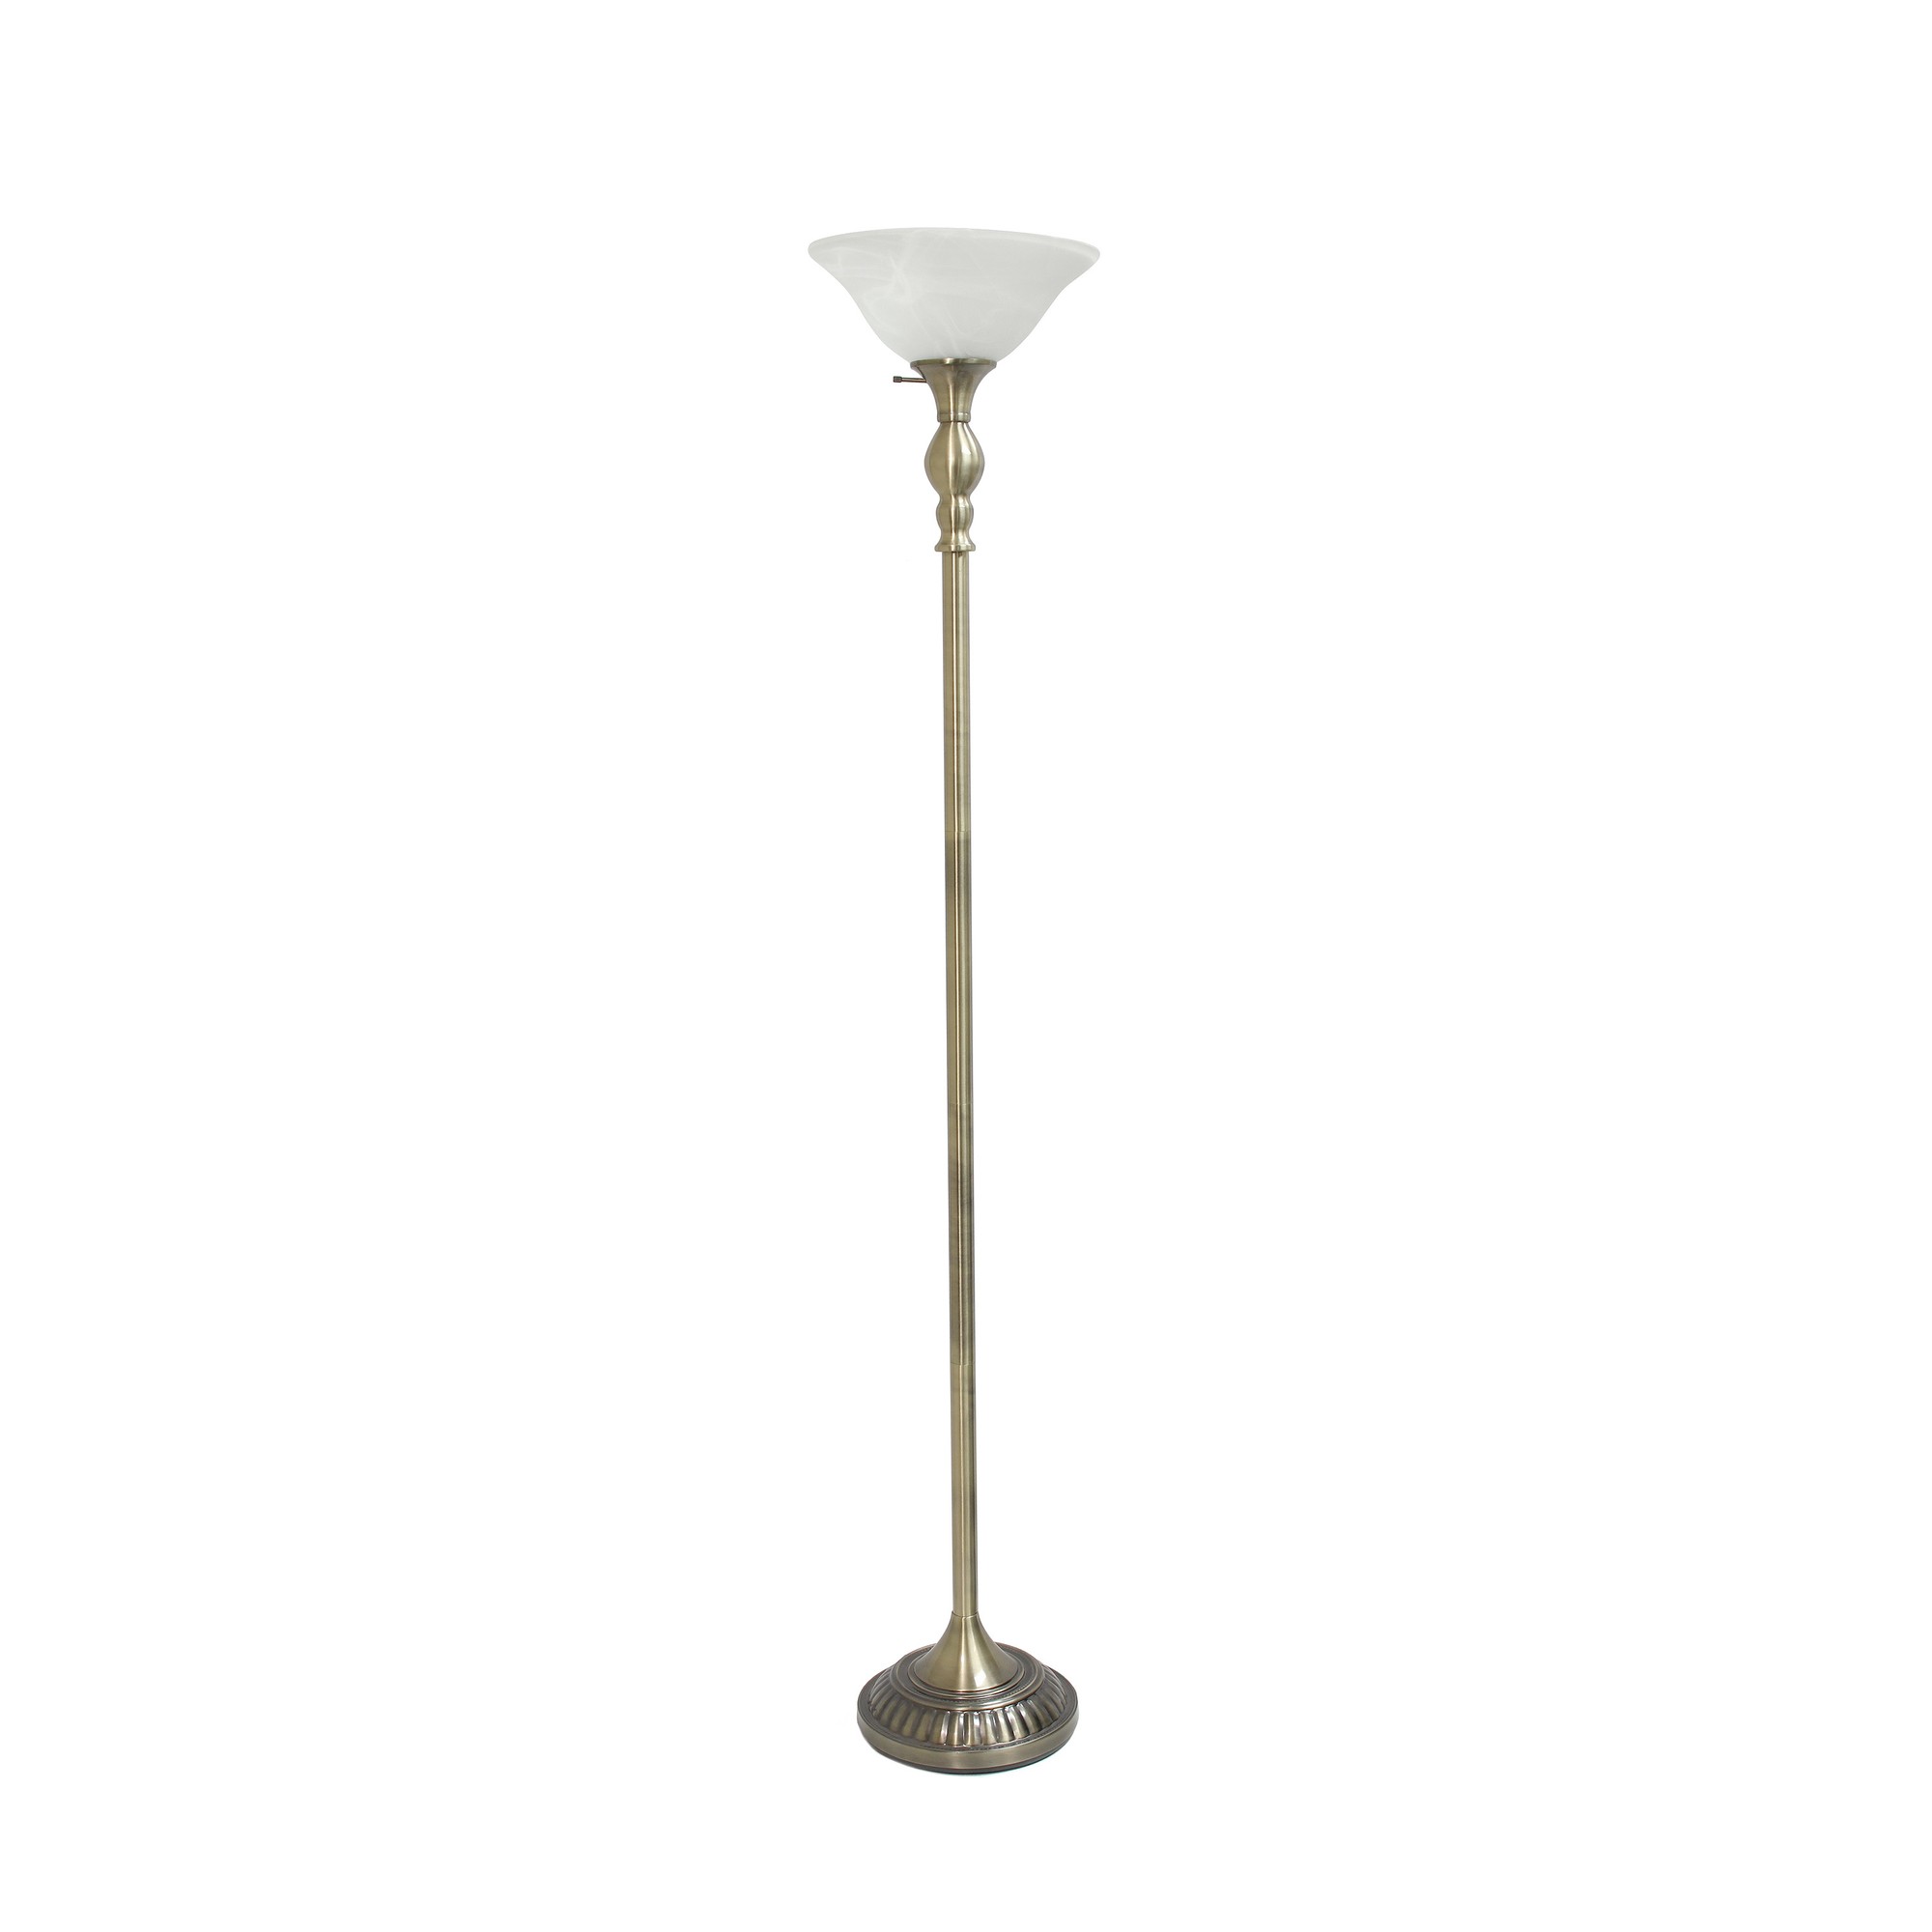 Lalia Home Classic 1 Light Torchiere Floor Lamp with Marbleized Glass Shade, Antique Brass